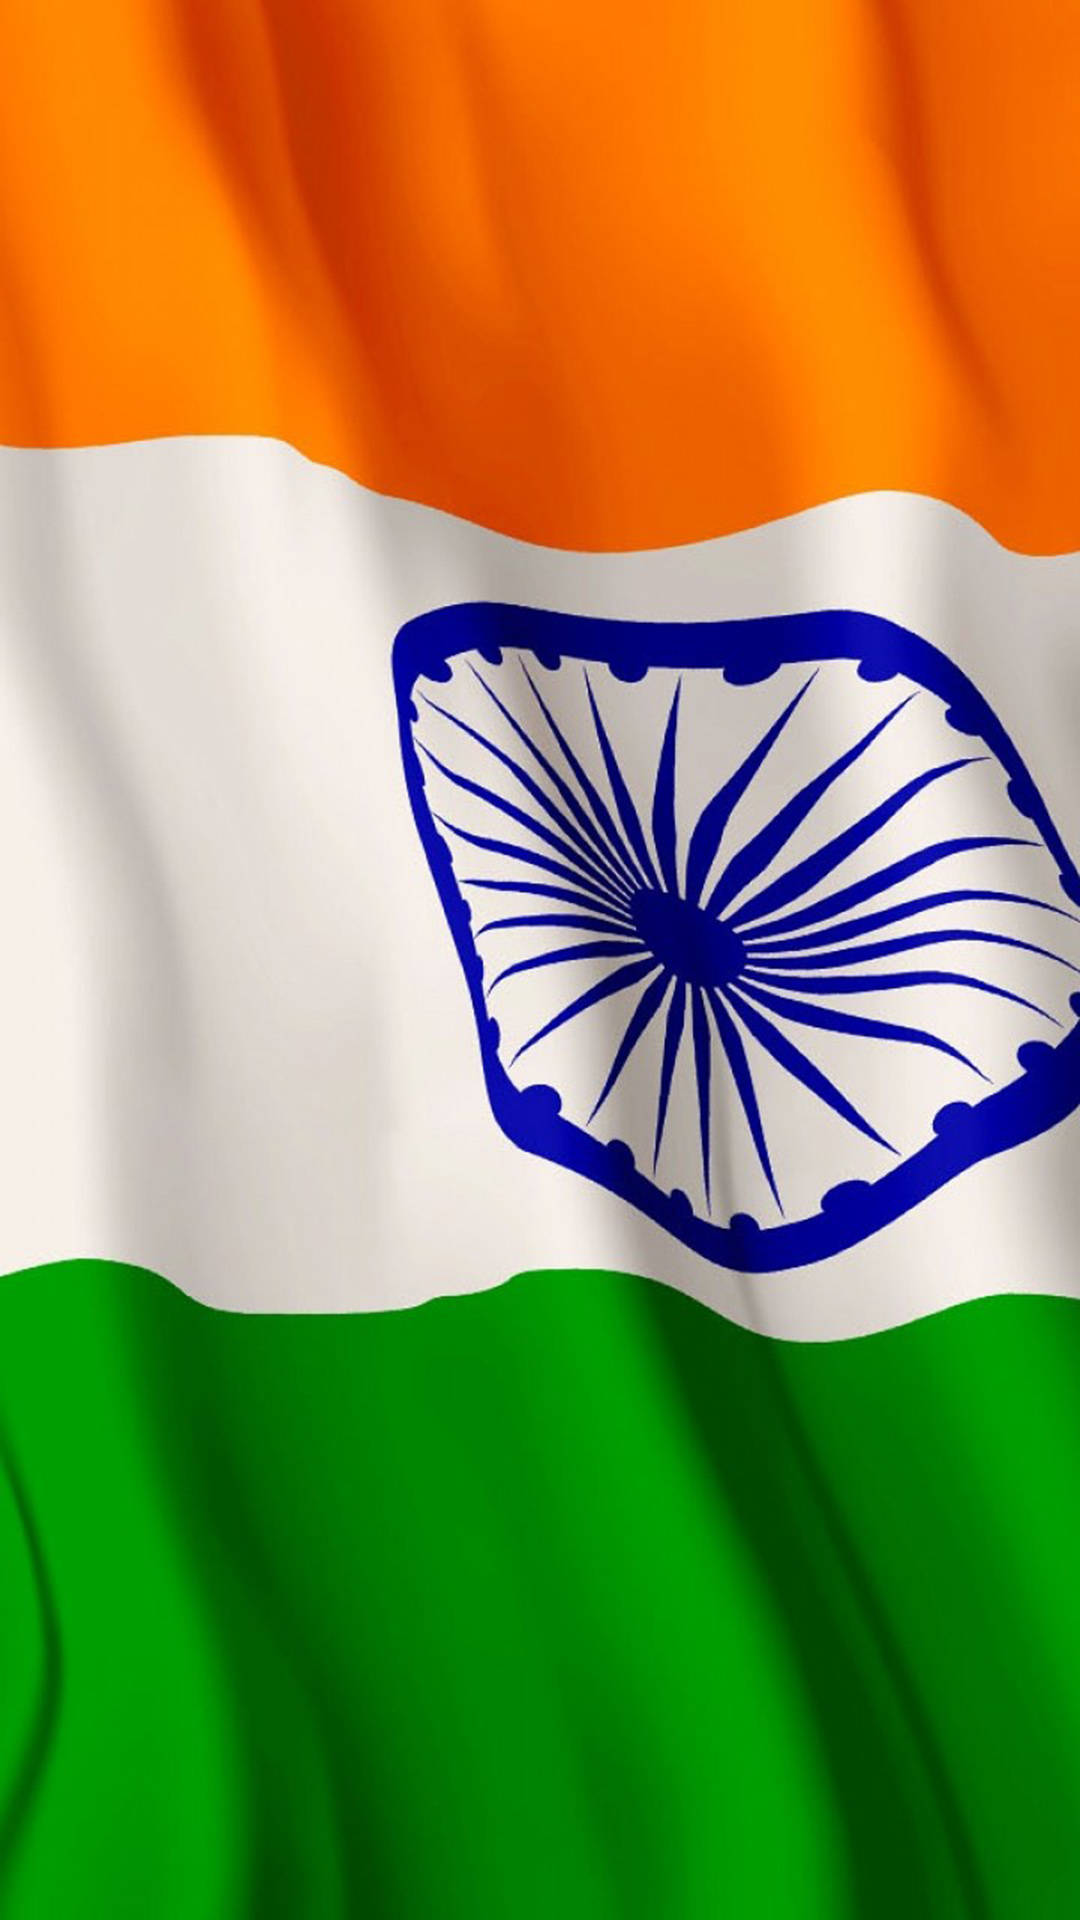 Proud Colors - The Wavy Indian Flag Wallpaper